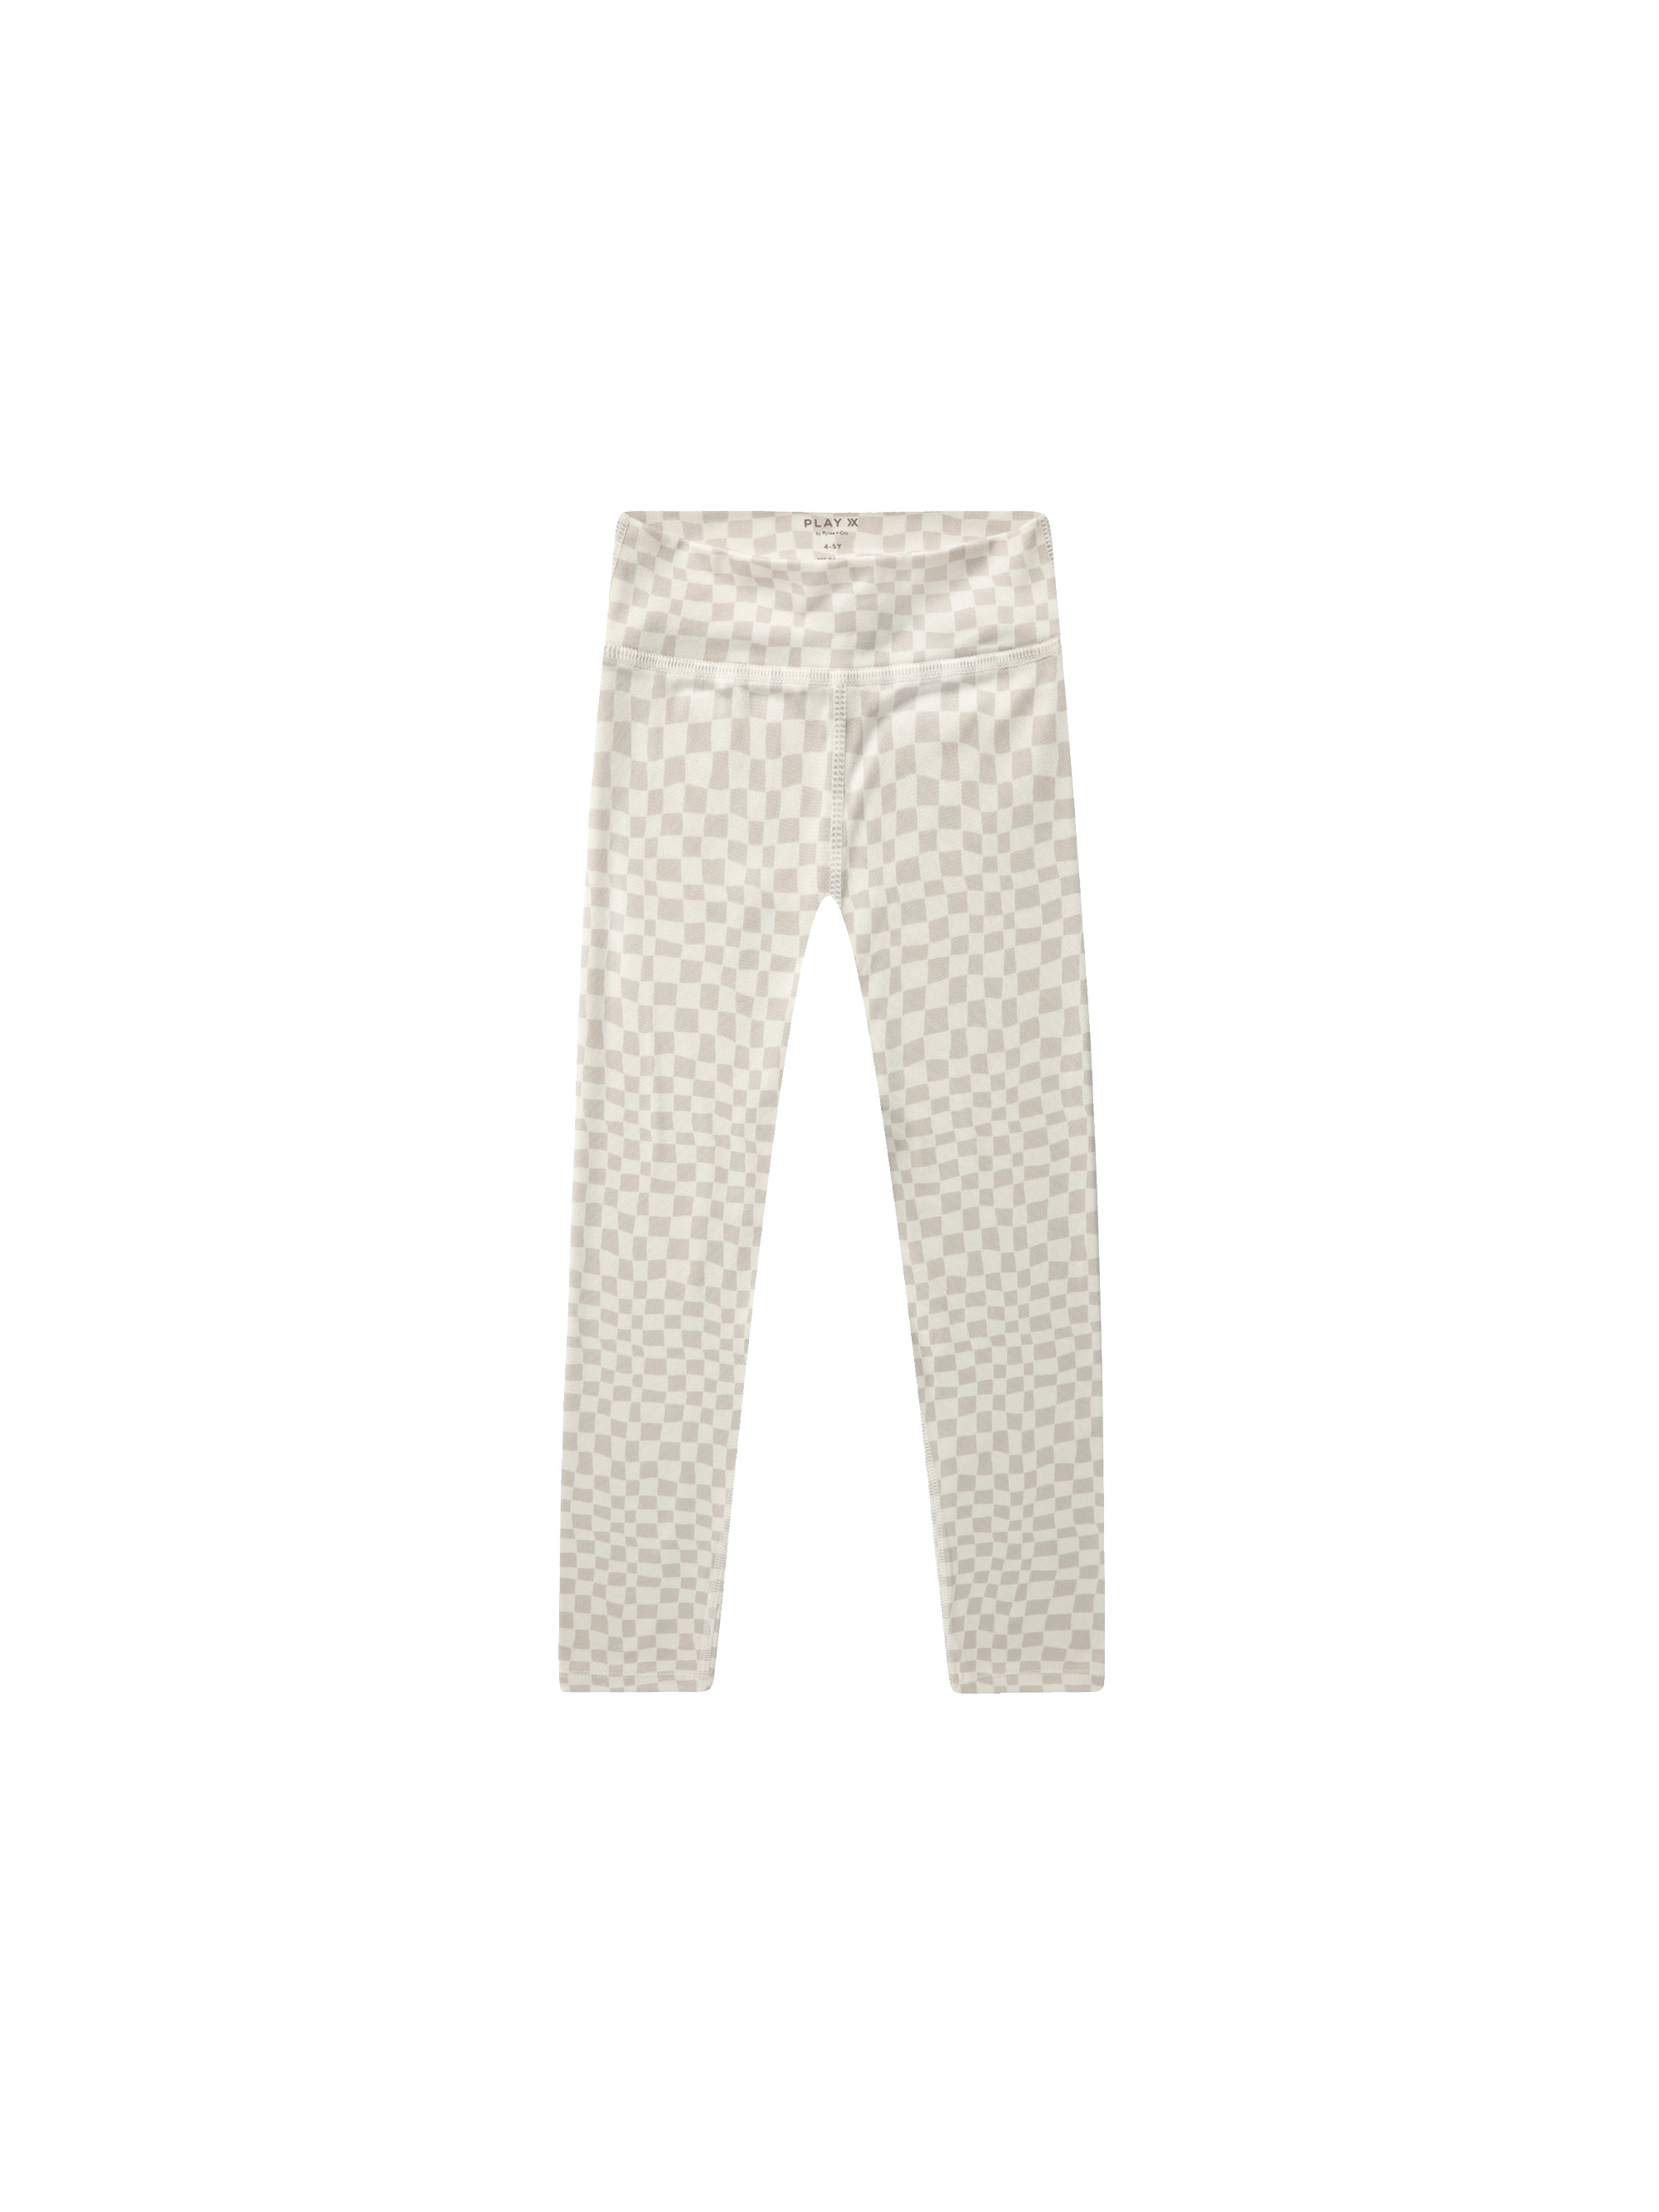 Basic Legging - Dove Check - Twinkle Twinkle Little One